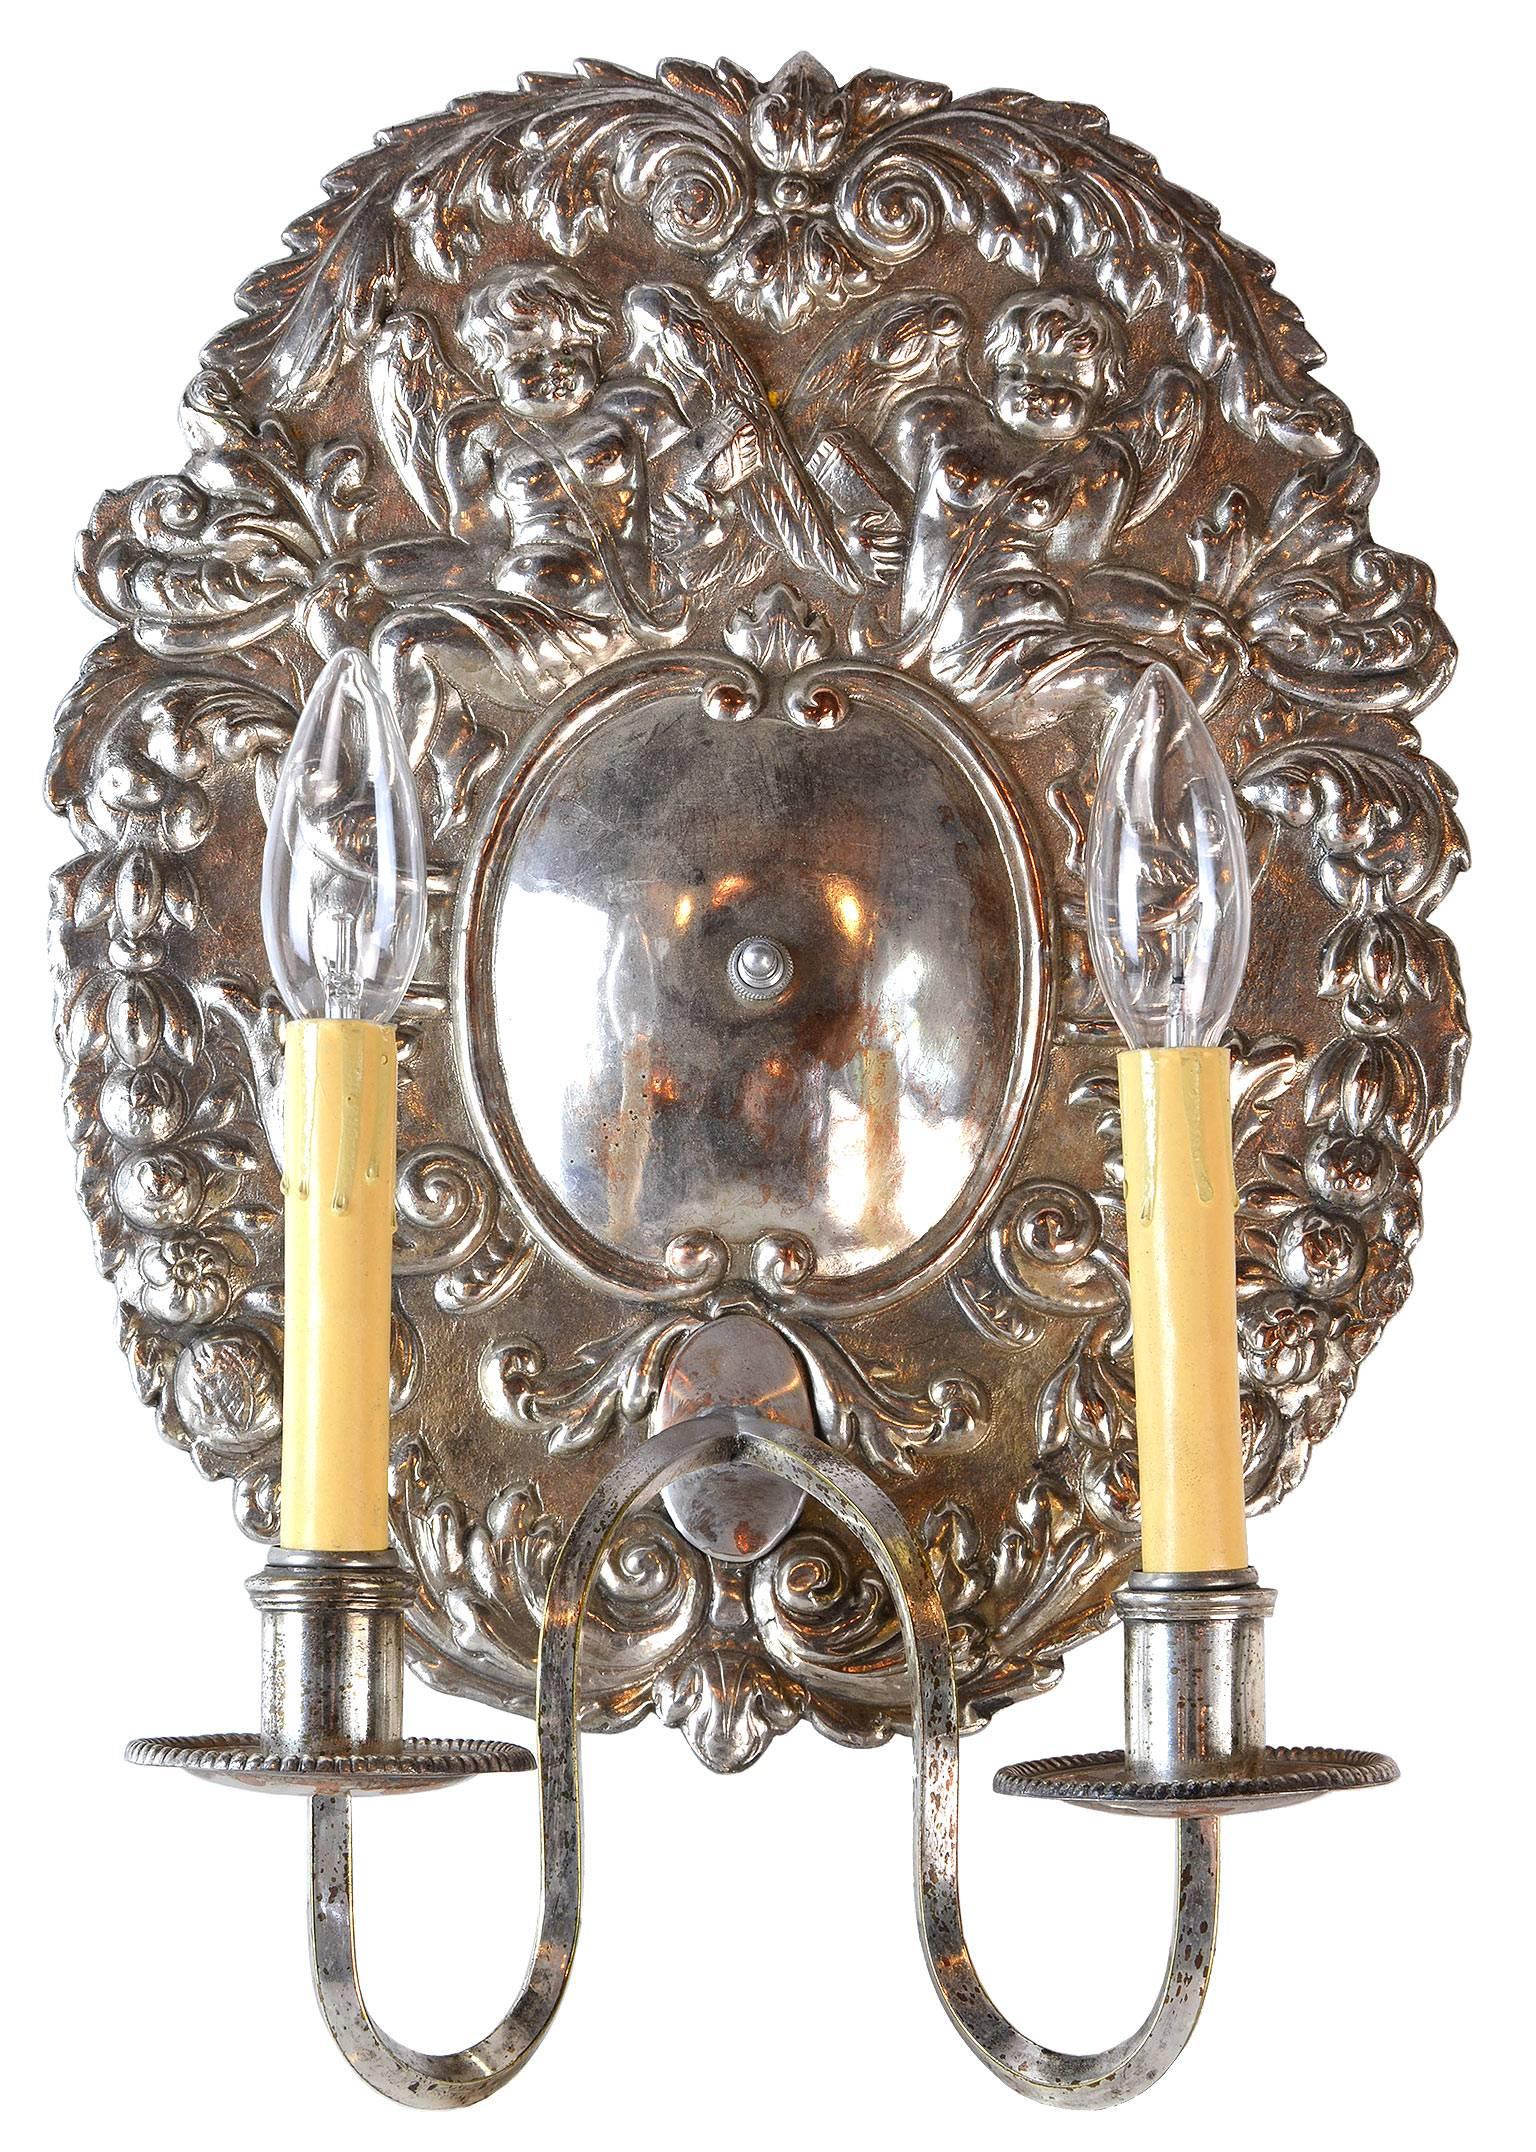 This two-arm sconce pair from circa 1880 was converted from candlesticks to electric, and has a large decorative silver backplate depicting cherubs and floral details. The making of this piece was exceptional, and its subject matter, in the Rococo